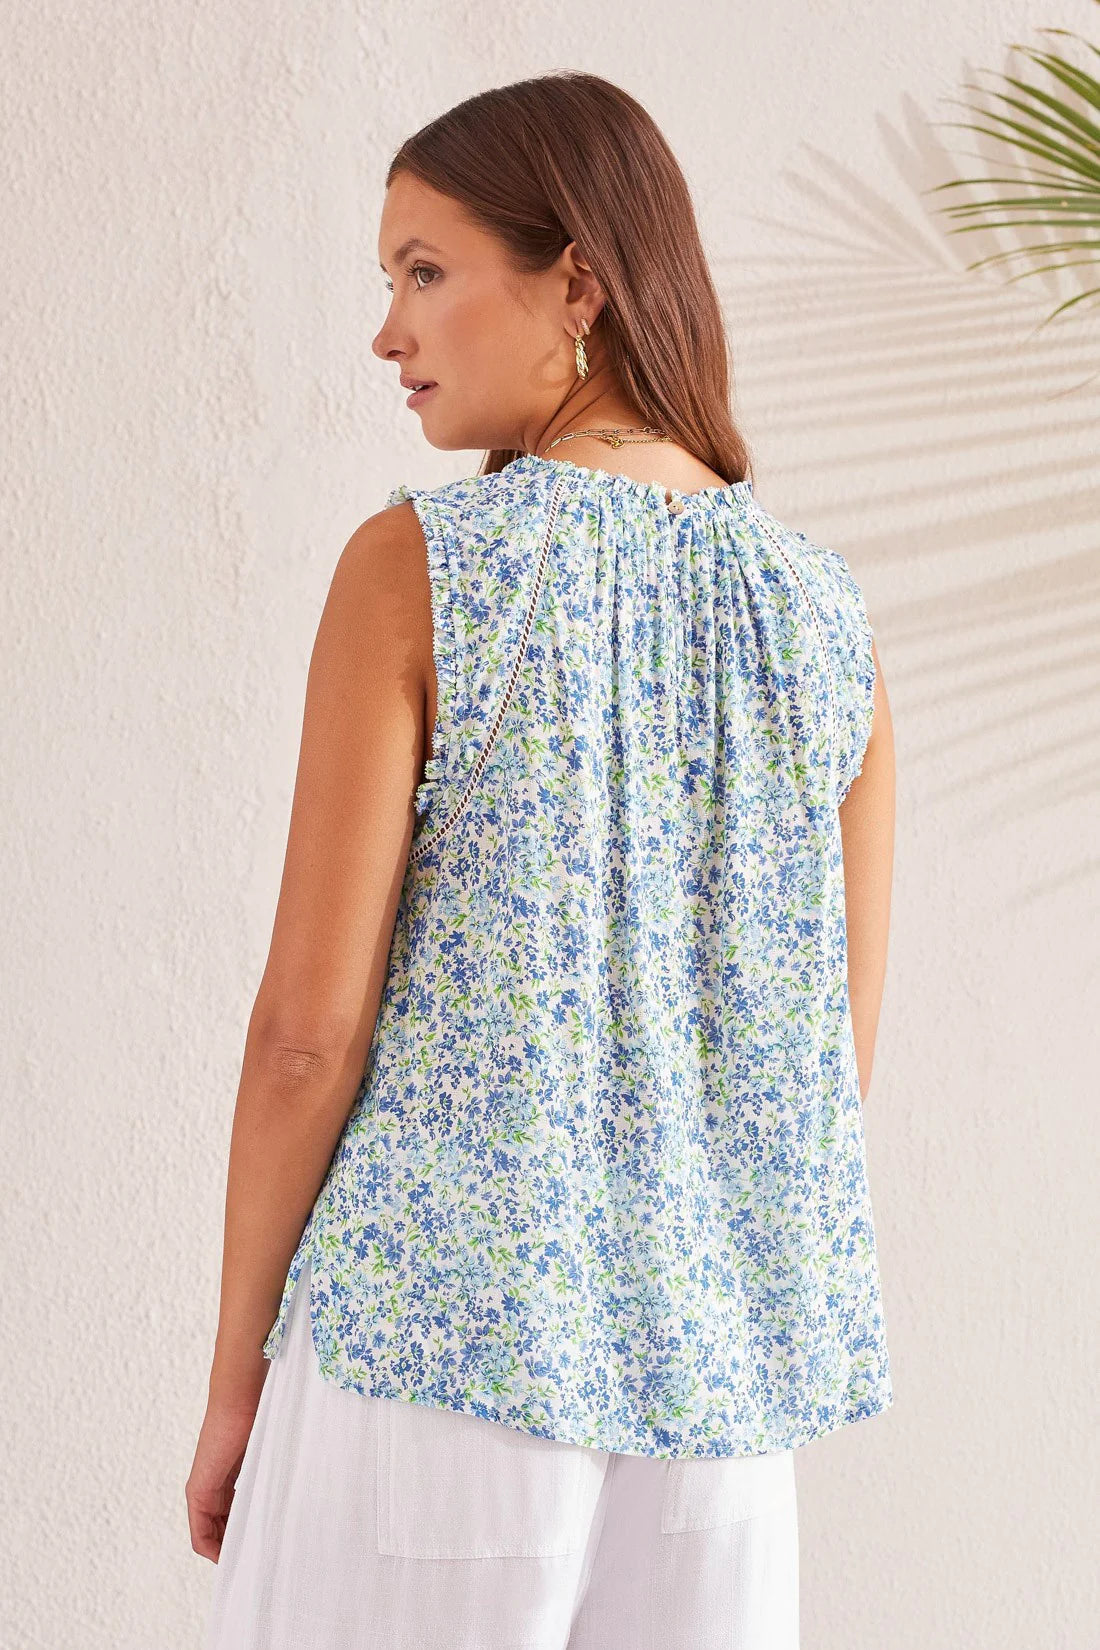 Designed with a fresh floral print, this sleeveless blouse takes your style to centerstage. We love the frilled edge at the neckline and armholes, crochet trim at the yoke, and lightweight jacquard fabric that feels airy all day long.